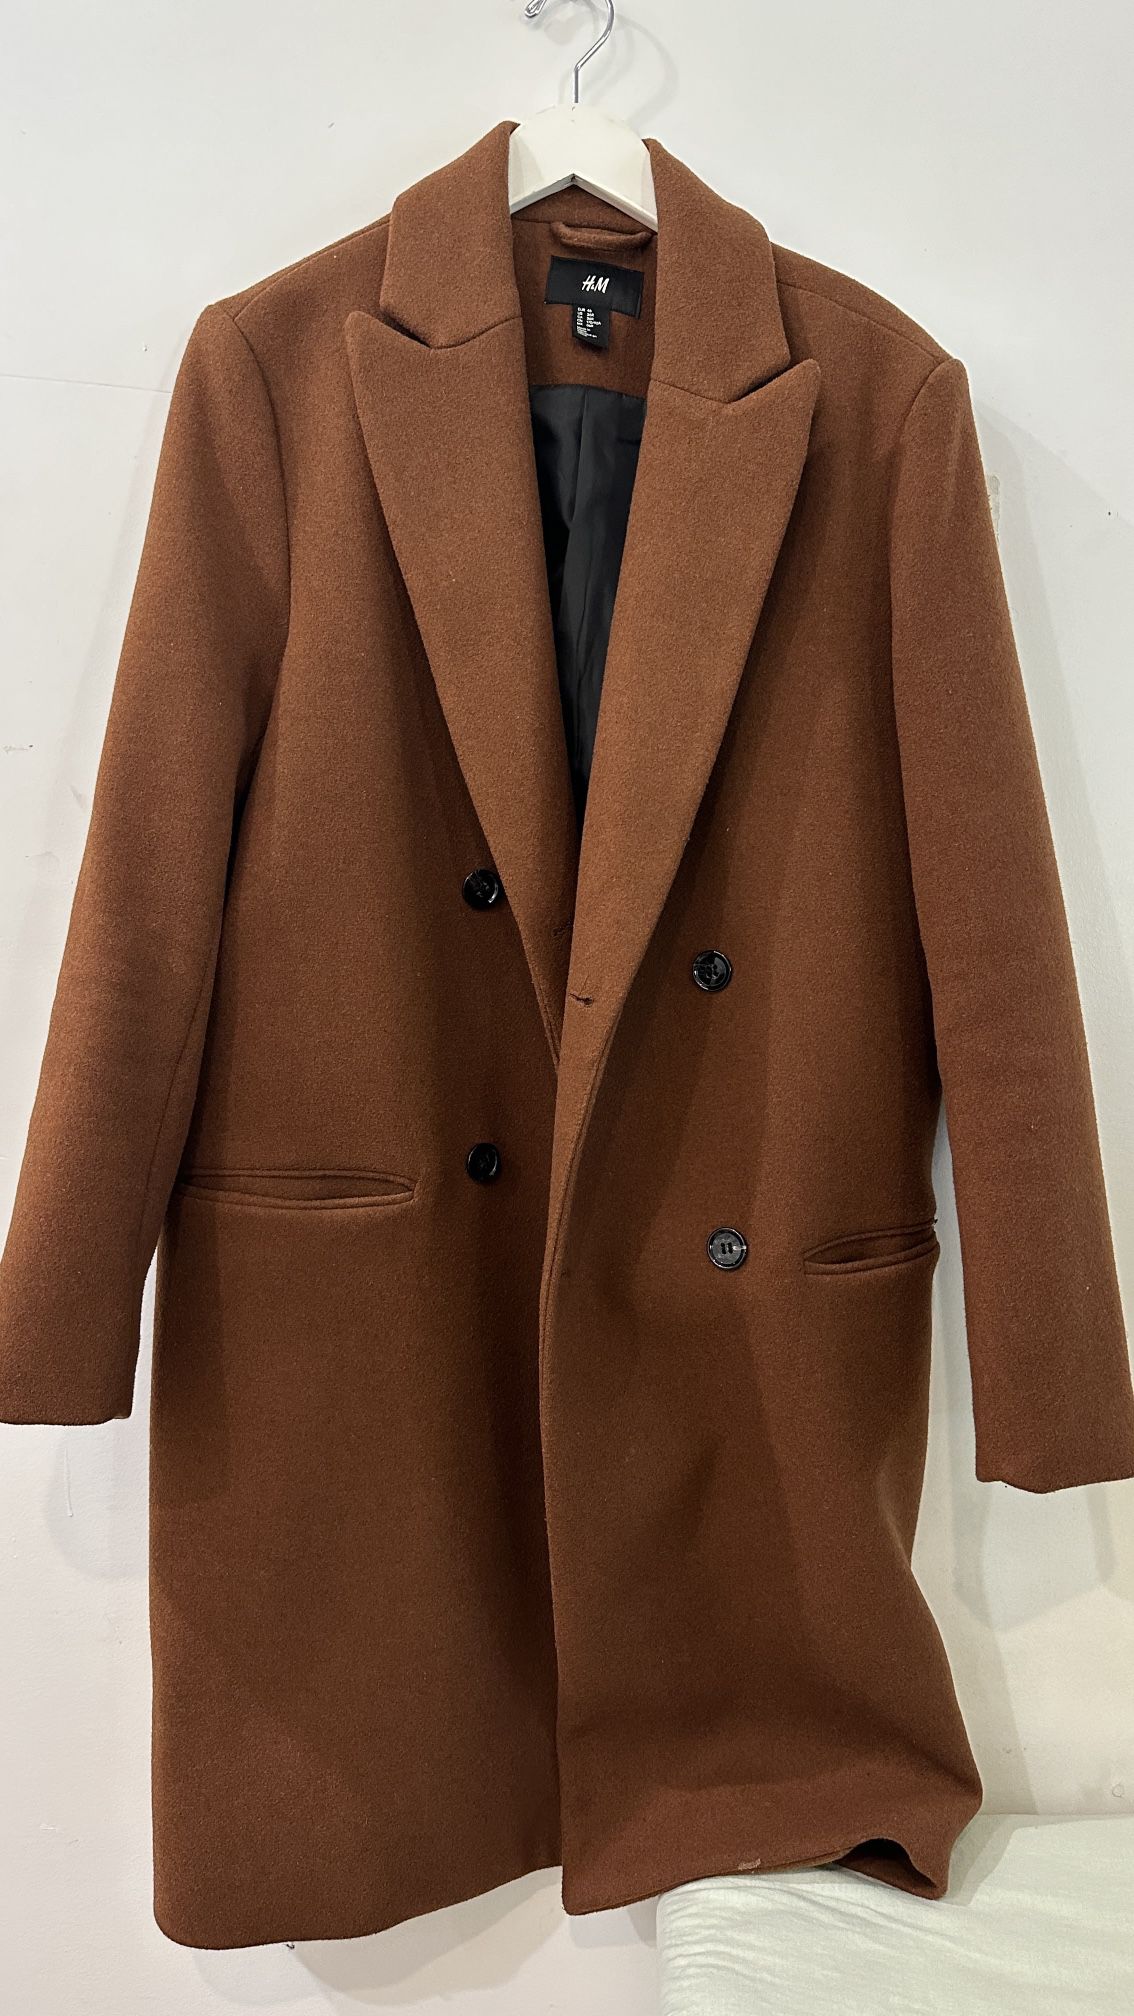 H&M Men’s Wool Coat Brown Rain Trench Peacoat Buttoned Double Breast Size 36R